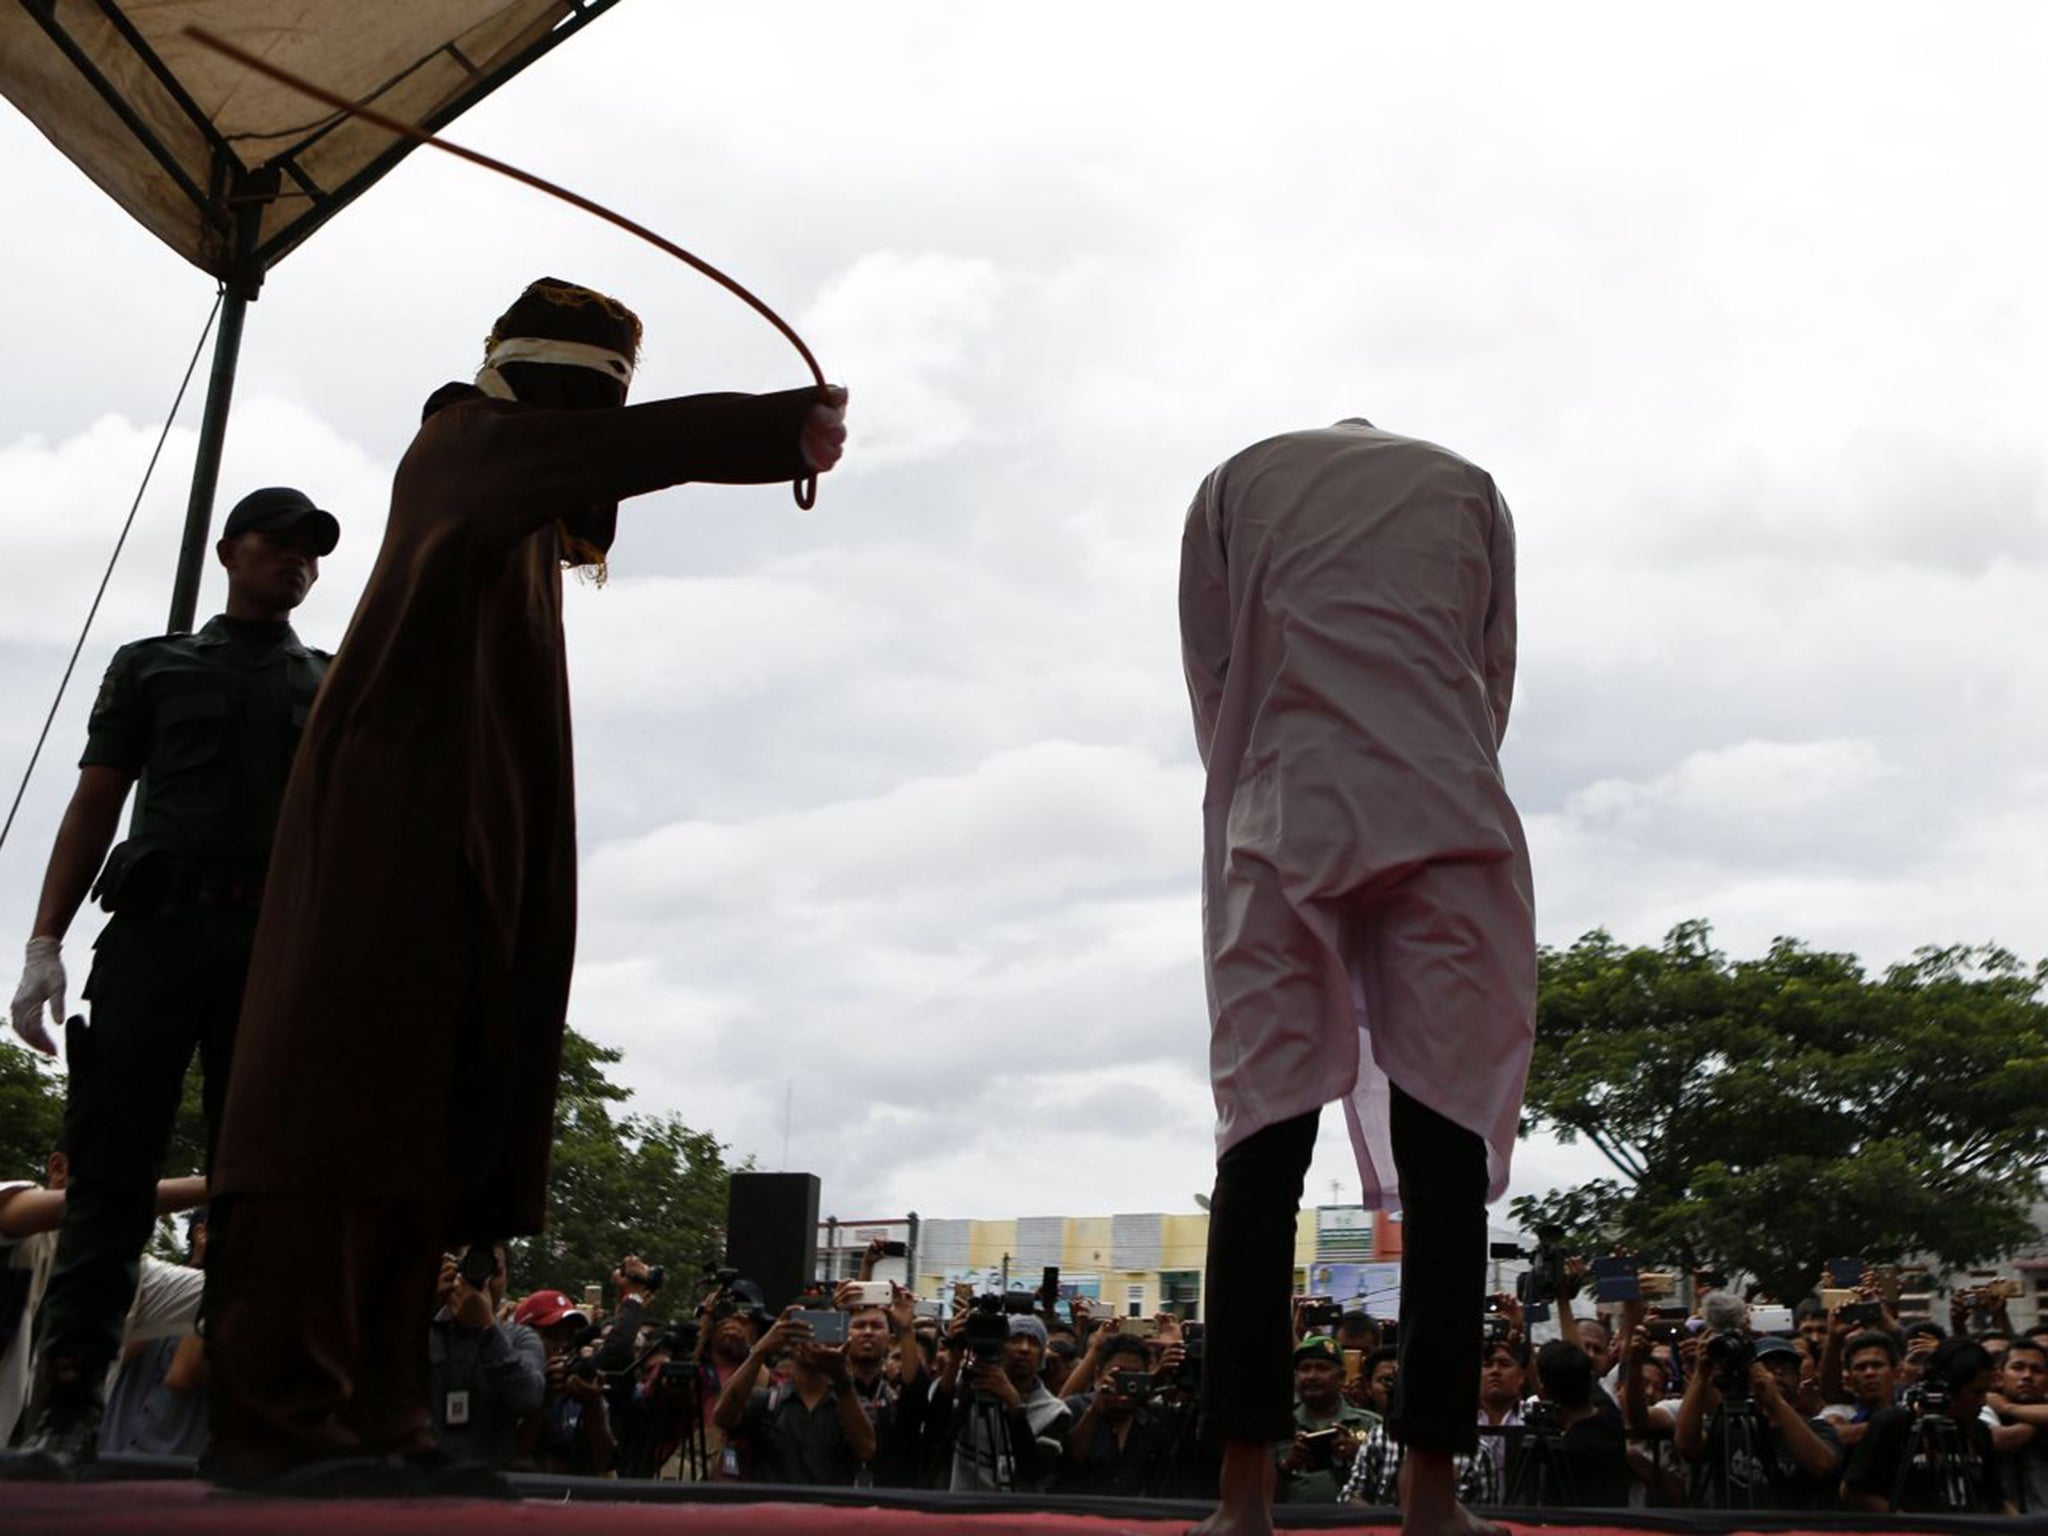 &#13;
A man is caned in the Indonesian region of Banda Aceh for having gay sex &#13;